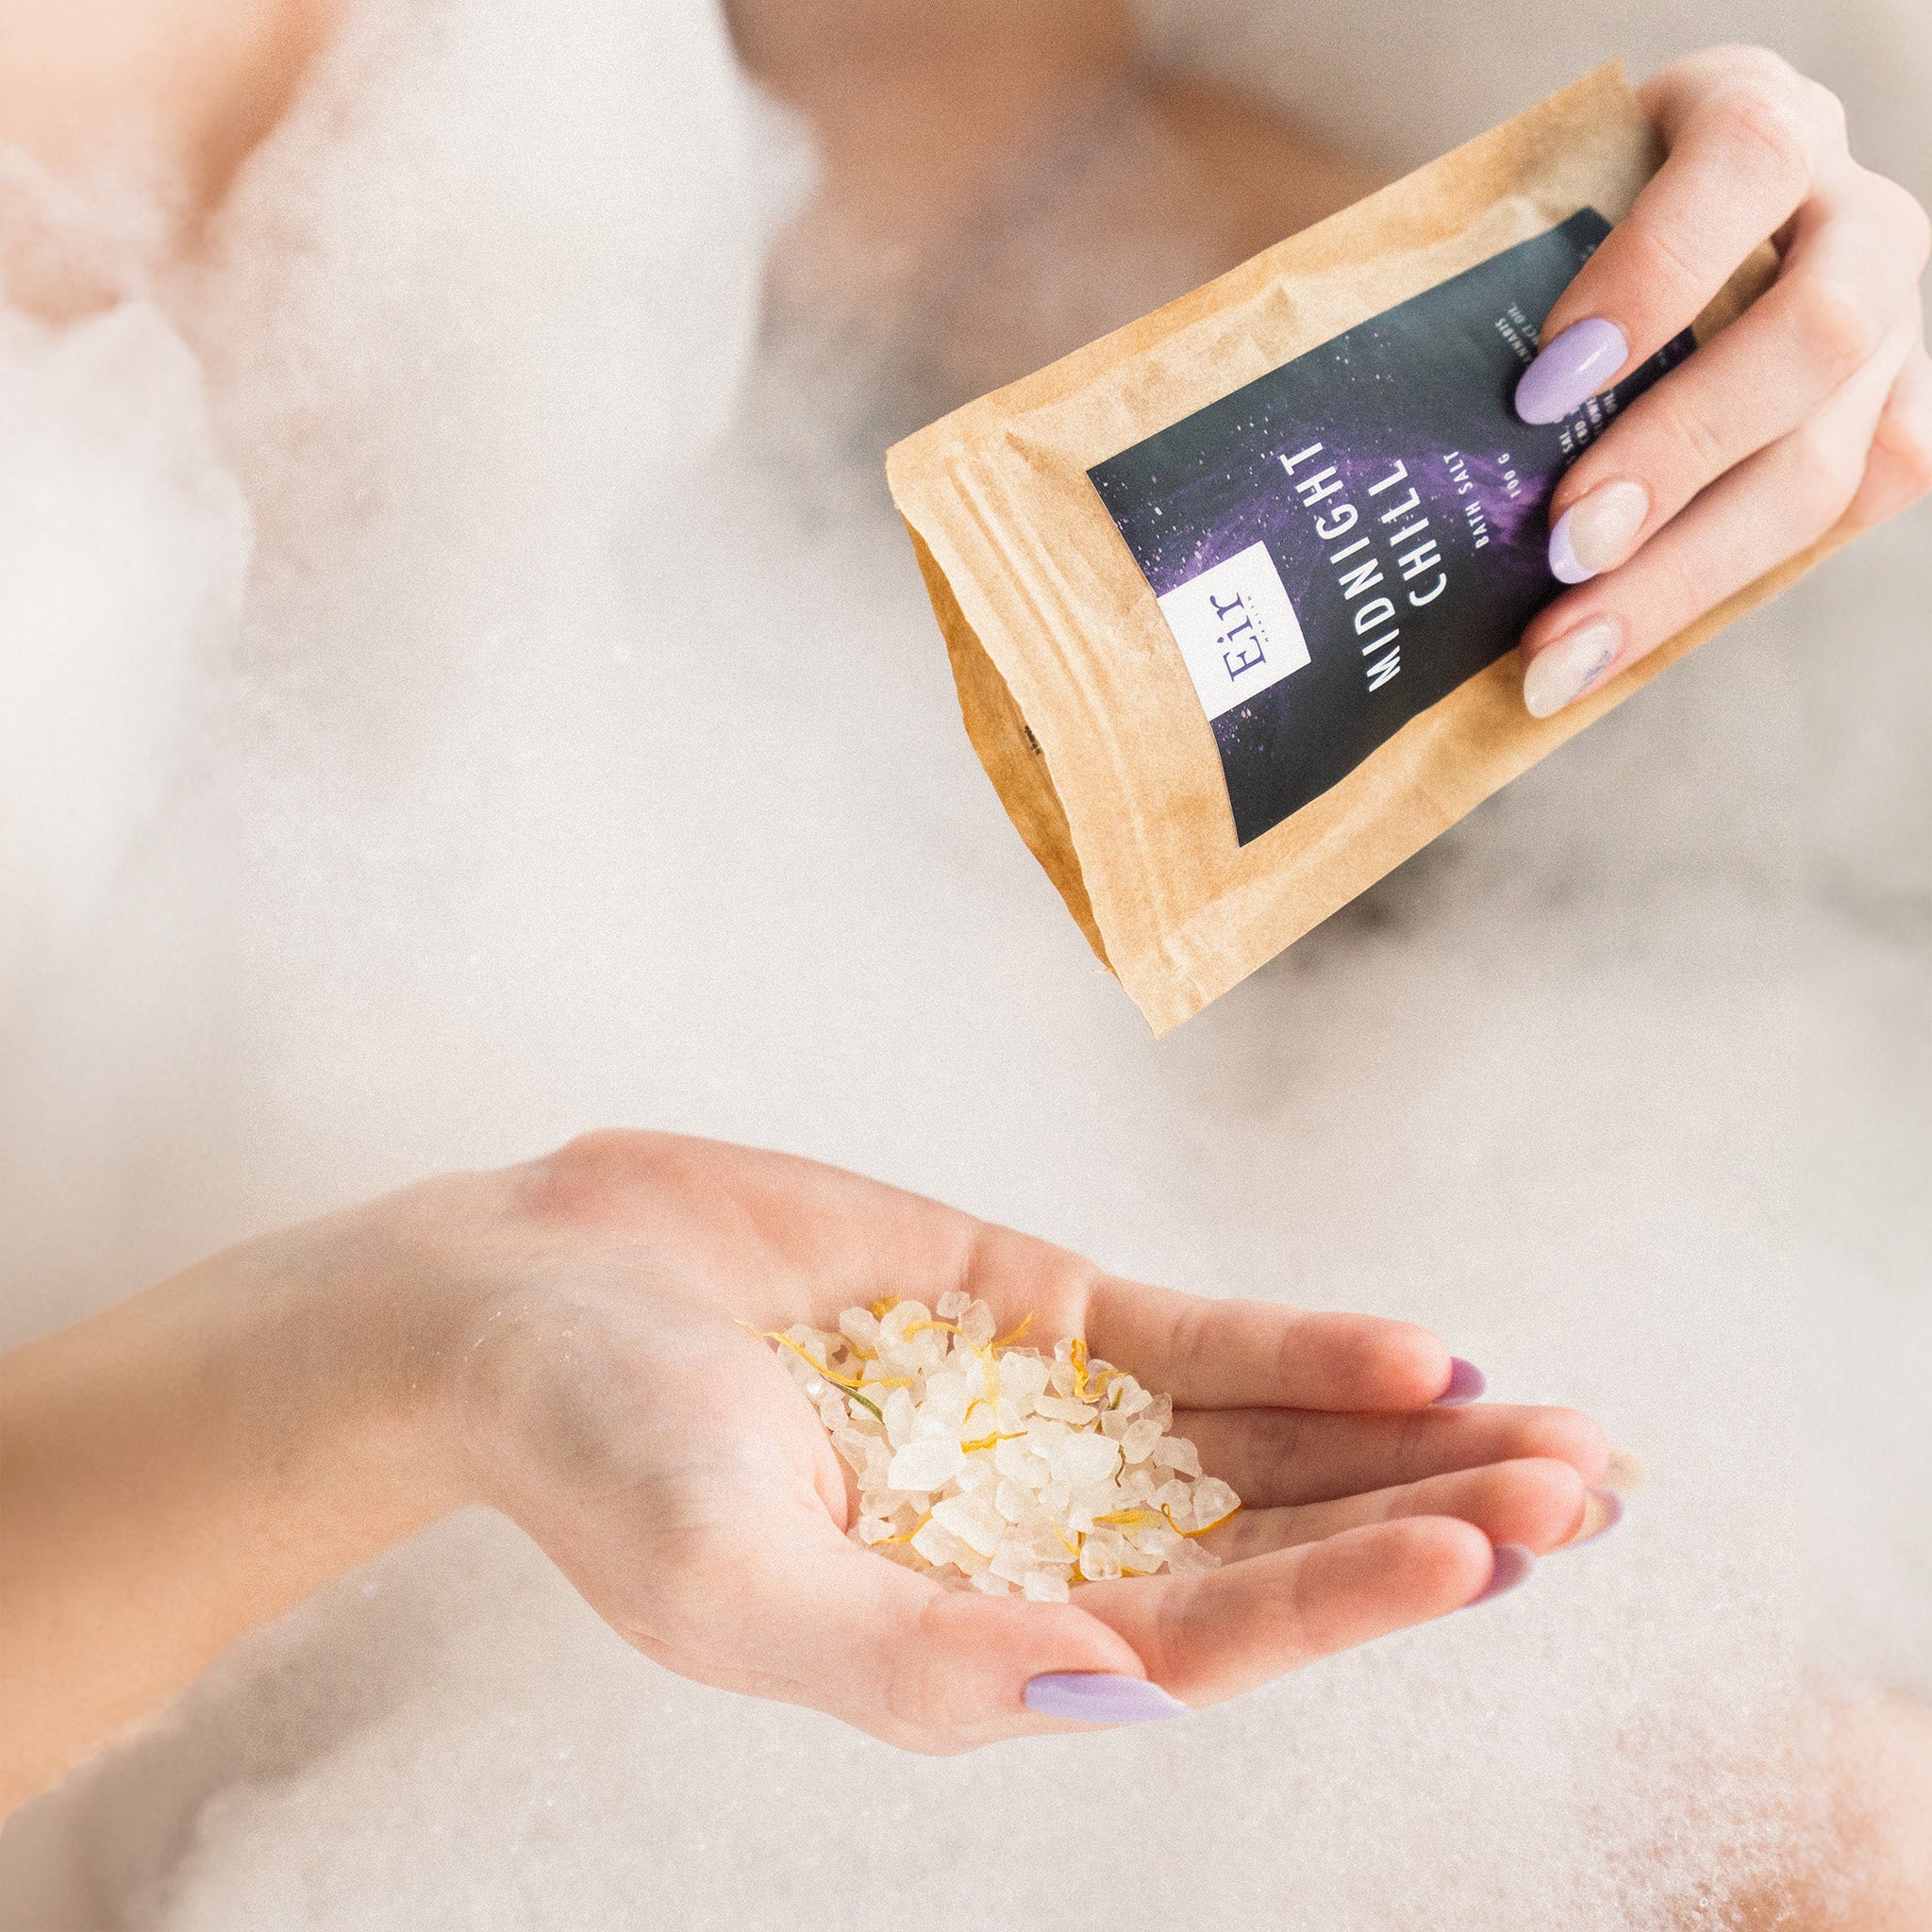 A woman's hand with light-colored nails pouring white bath salt crystals from the paper packaging of "Midnight Chill."